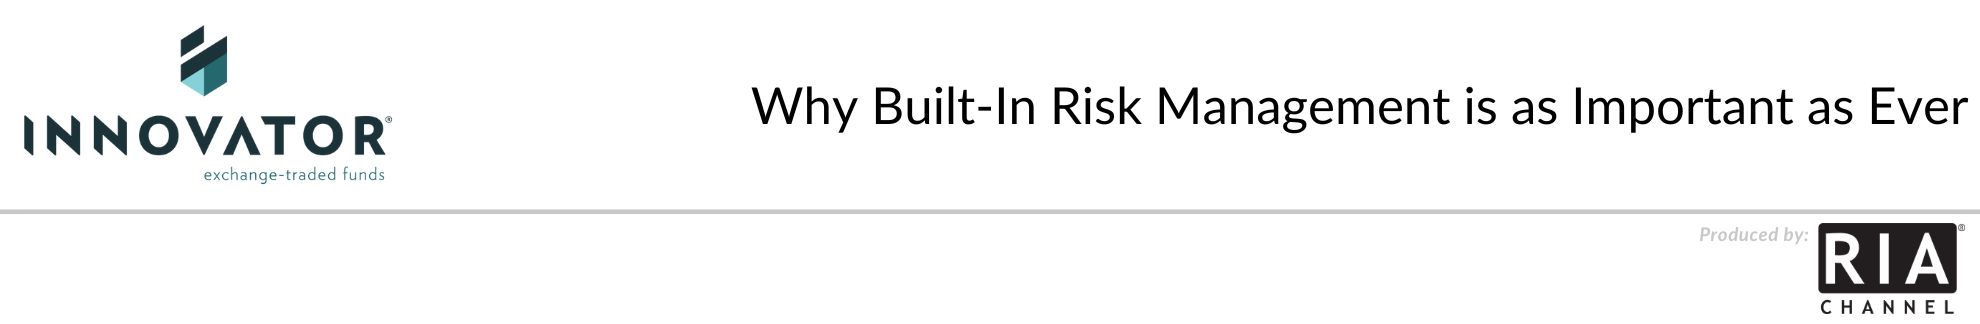 Why Built-In Risk Management is as Important as Ever